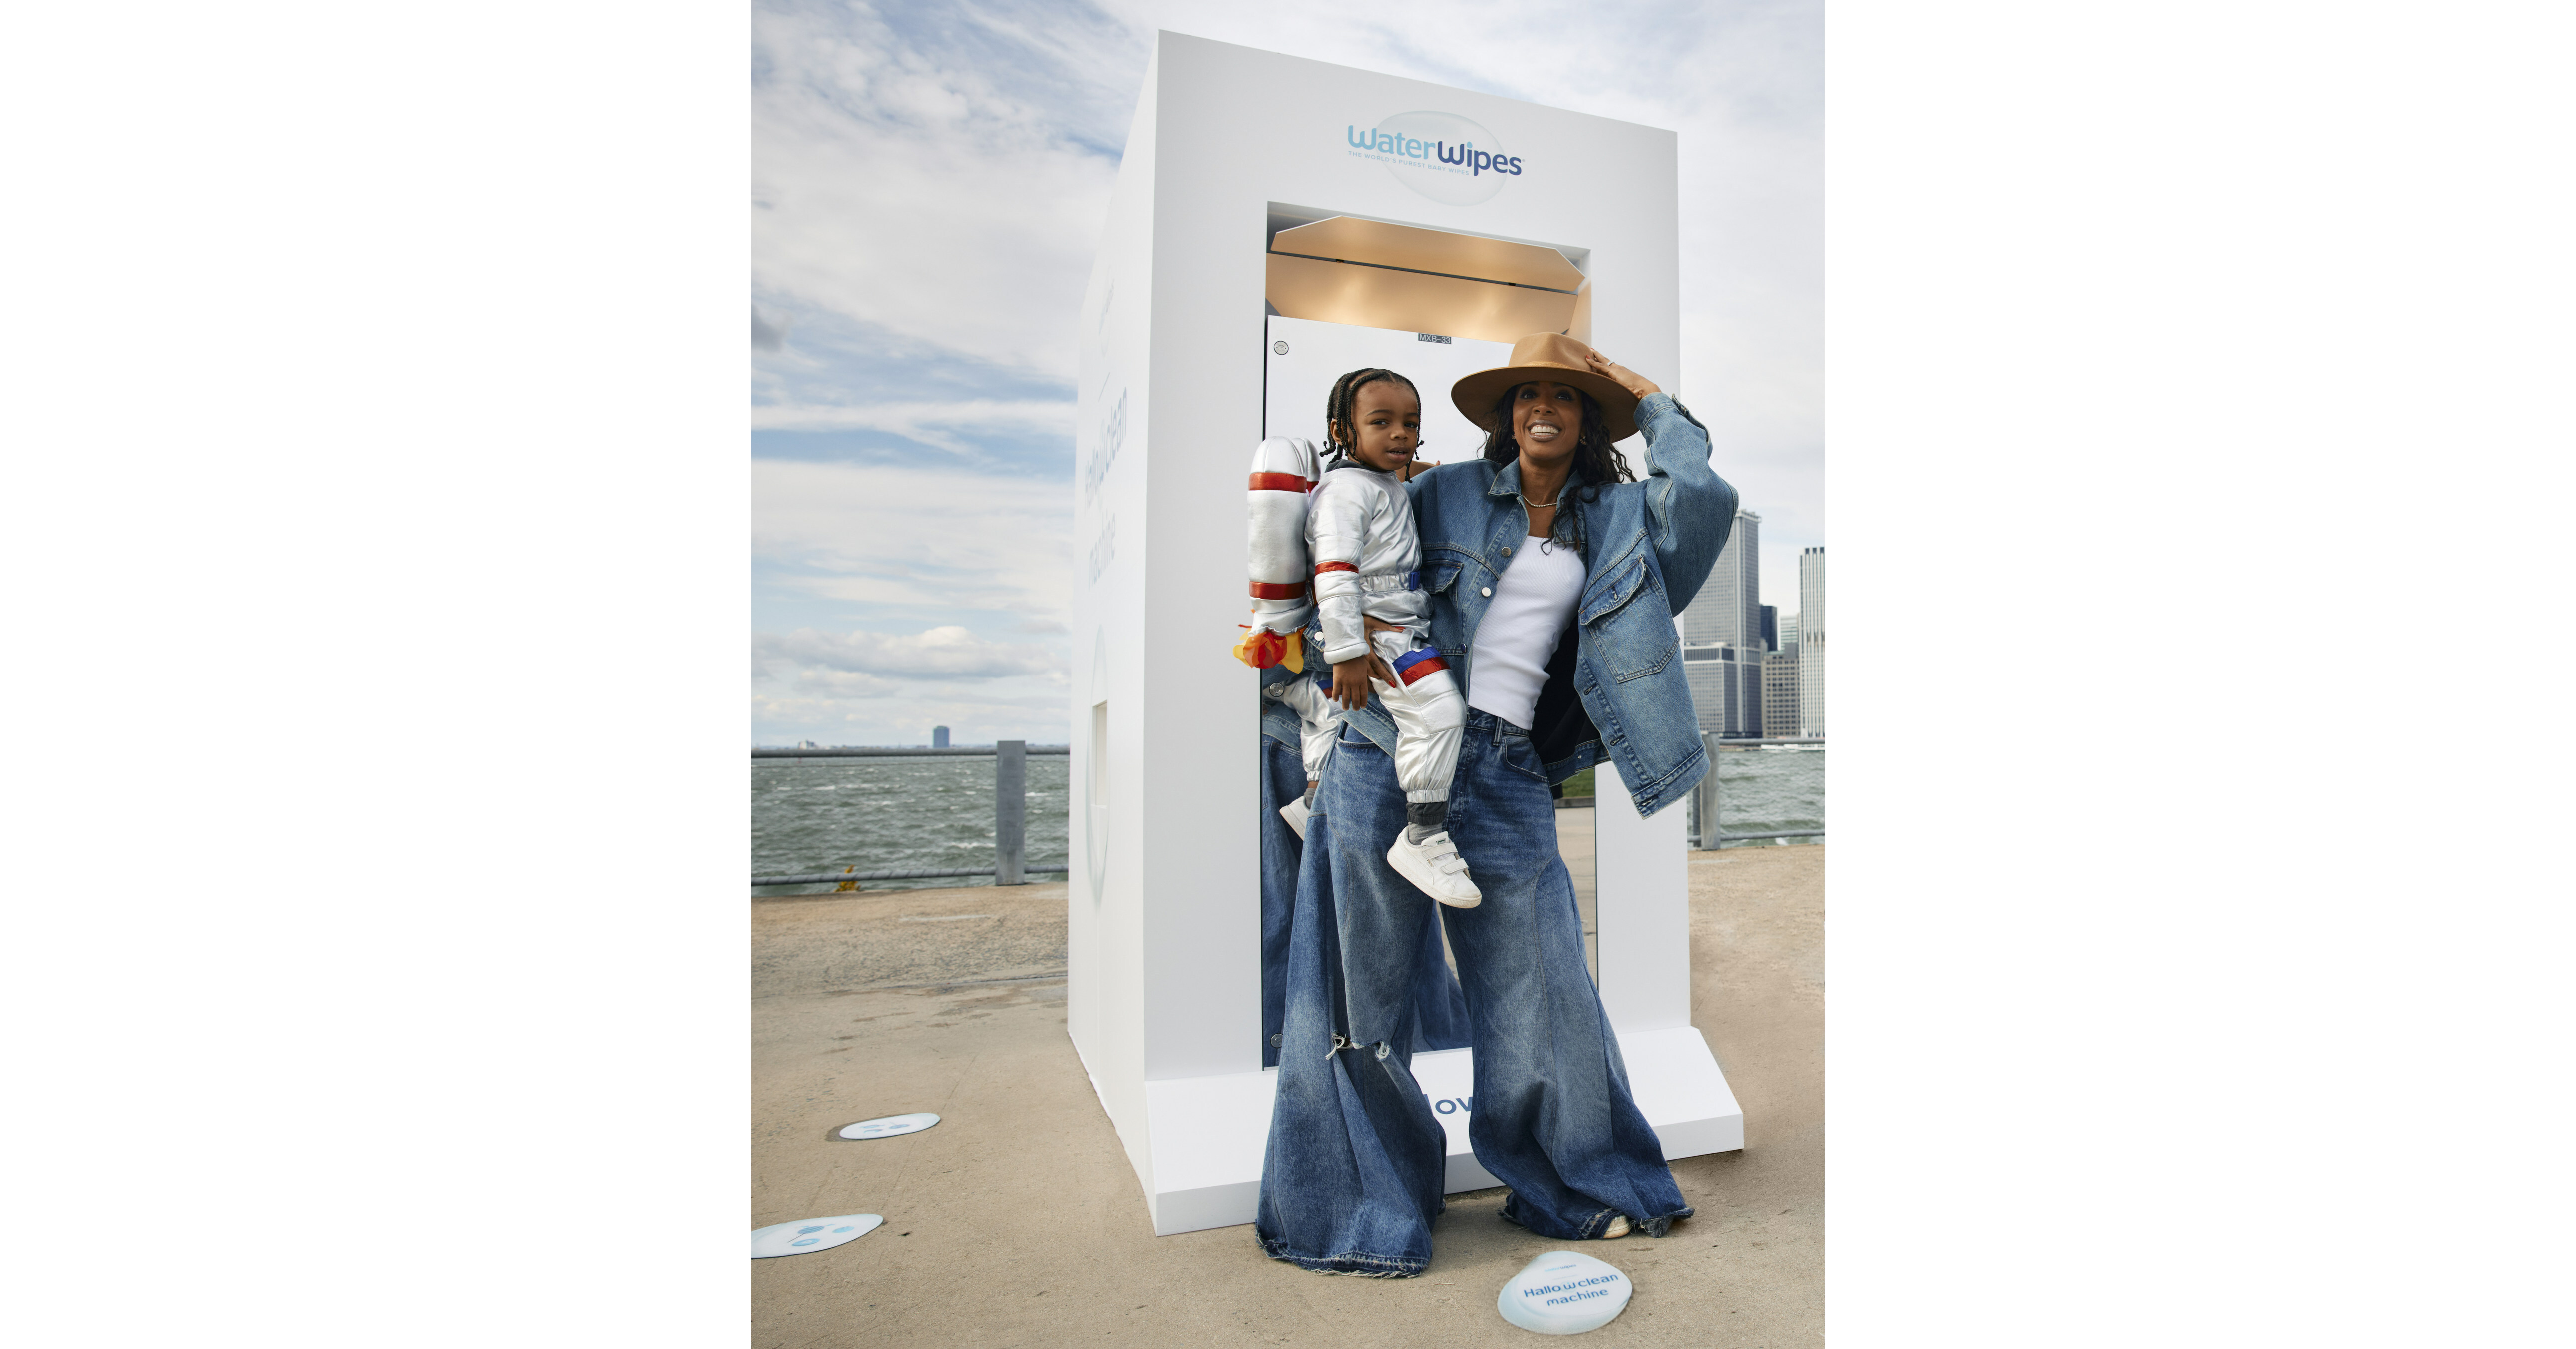 Kelly Rowland Partners With Water Wipes For #Hallowclean Station Campaign –  Royaltee Magazine